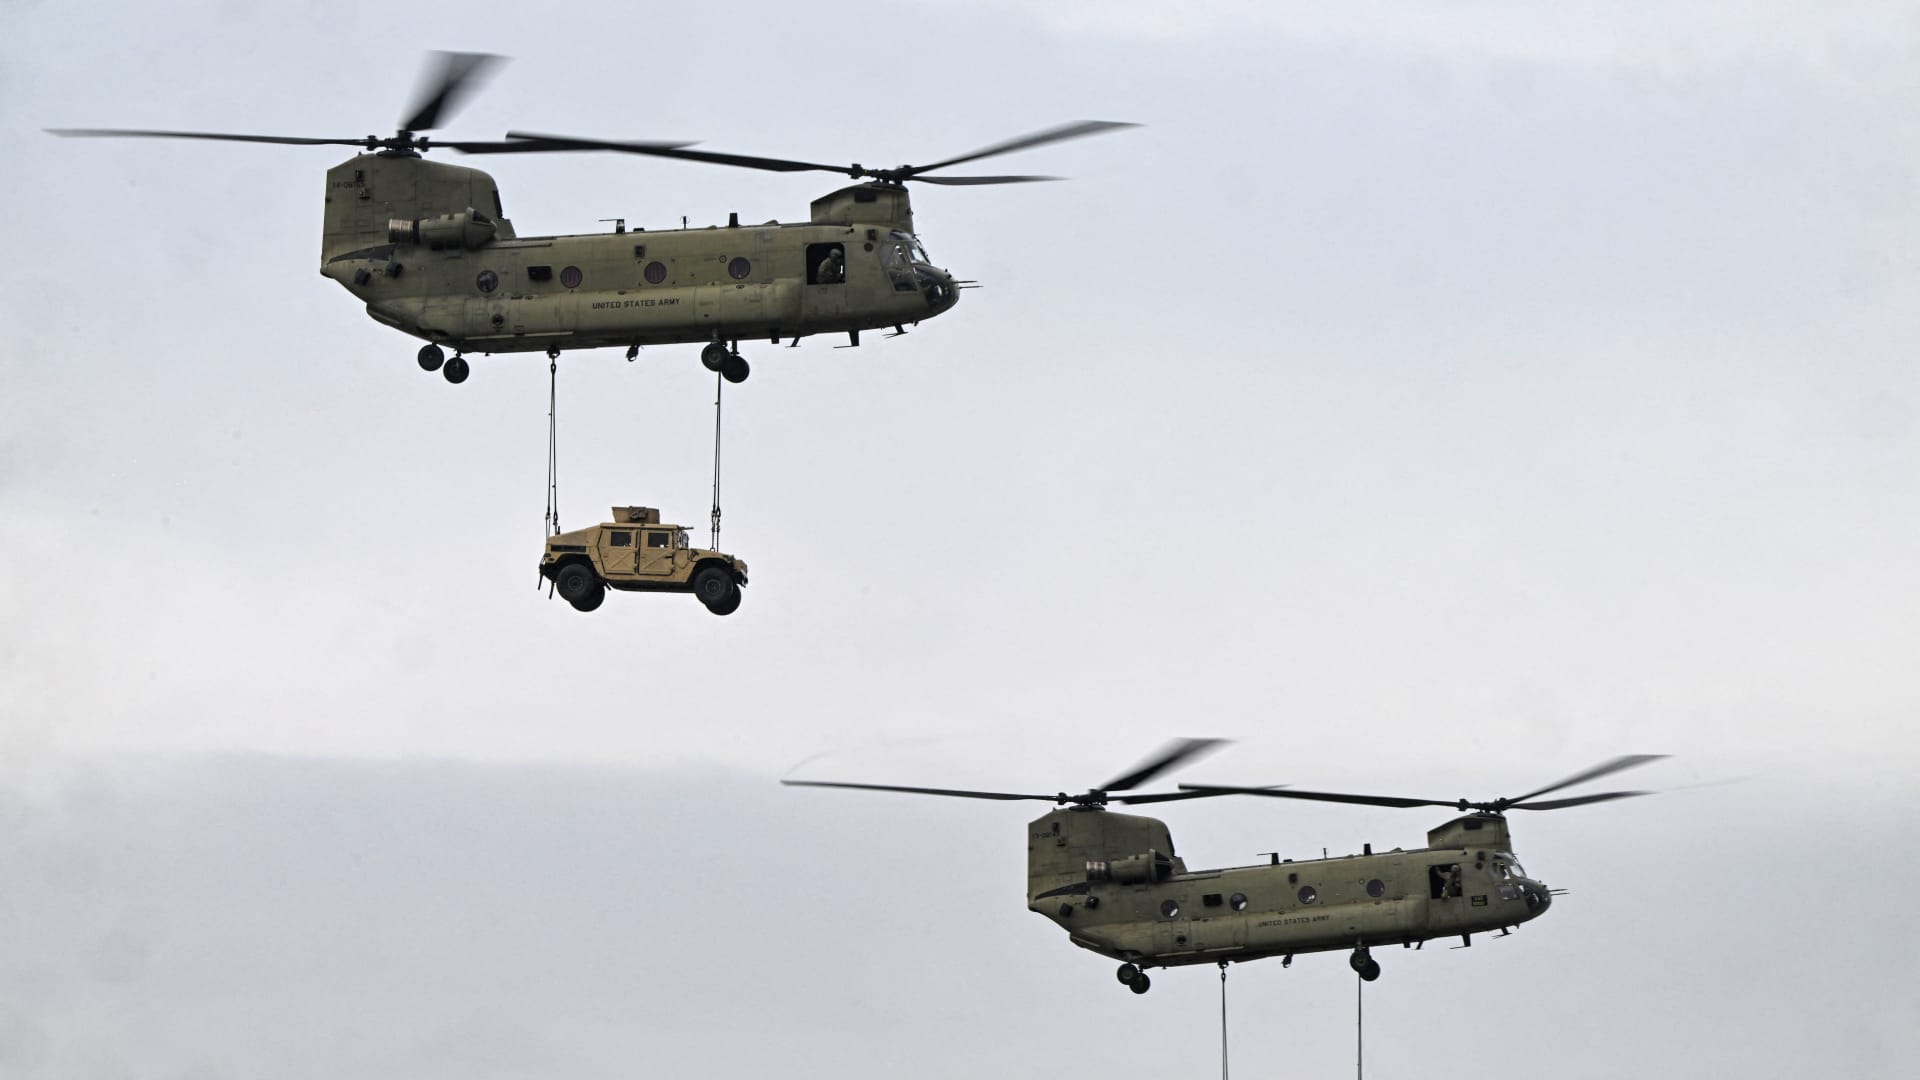 Boeing CH-47F Chinook tandem rotor helicopters (Vertol) transport military vehicles during a demonstration as part of the rotation of US troops of the US Army 101 Airborne division at Mihail Kogalniceanu Air Base (RoAF 57th Air Base) near Constanta, Romania on March 31, 2023. 